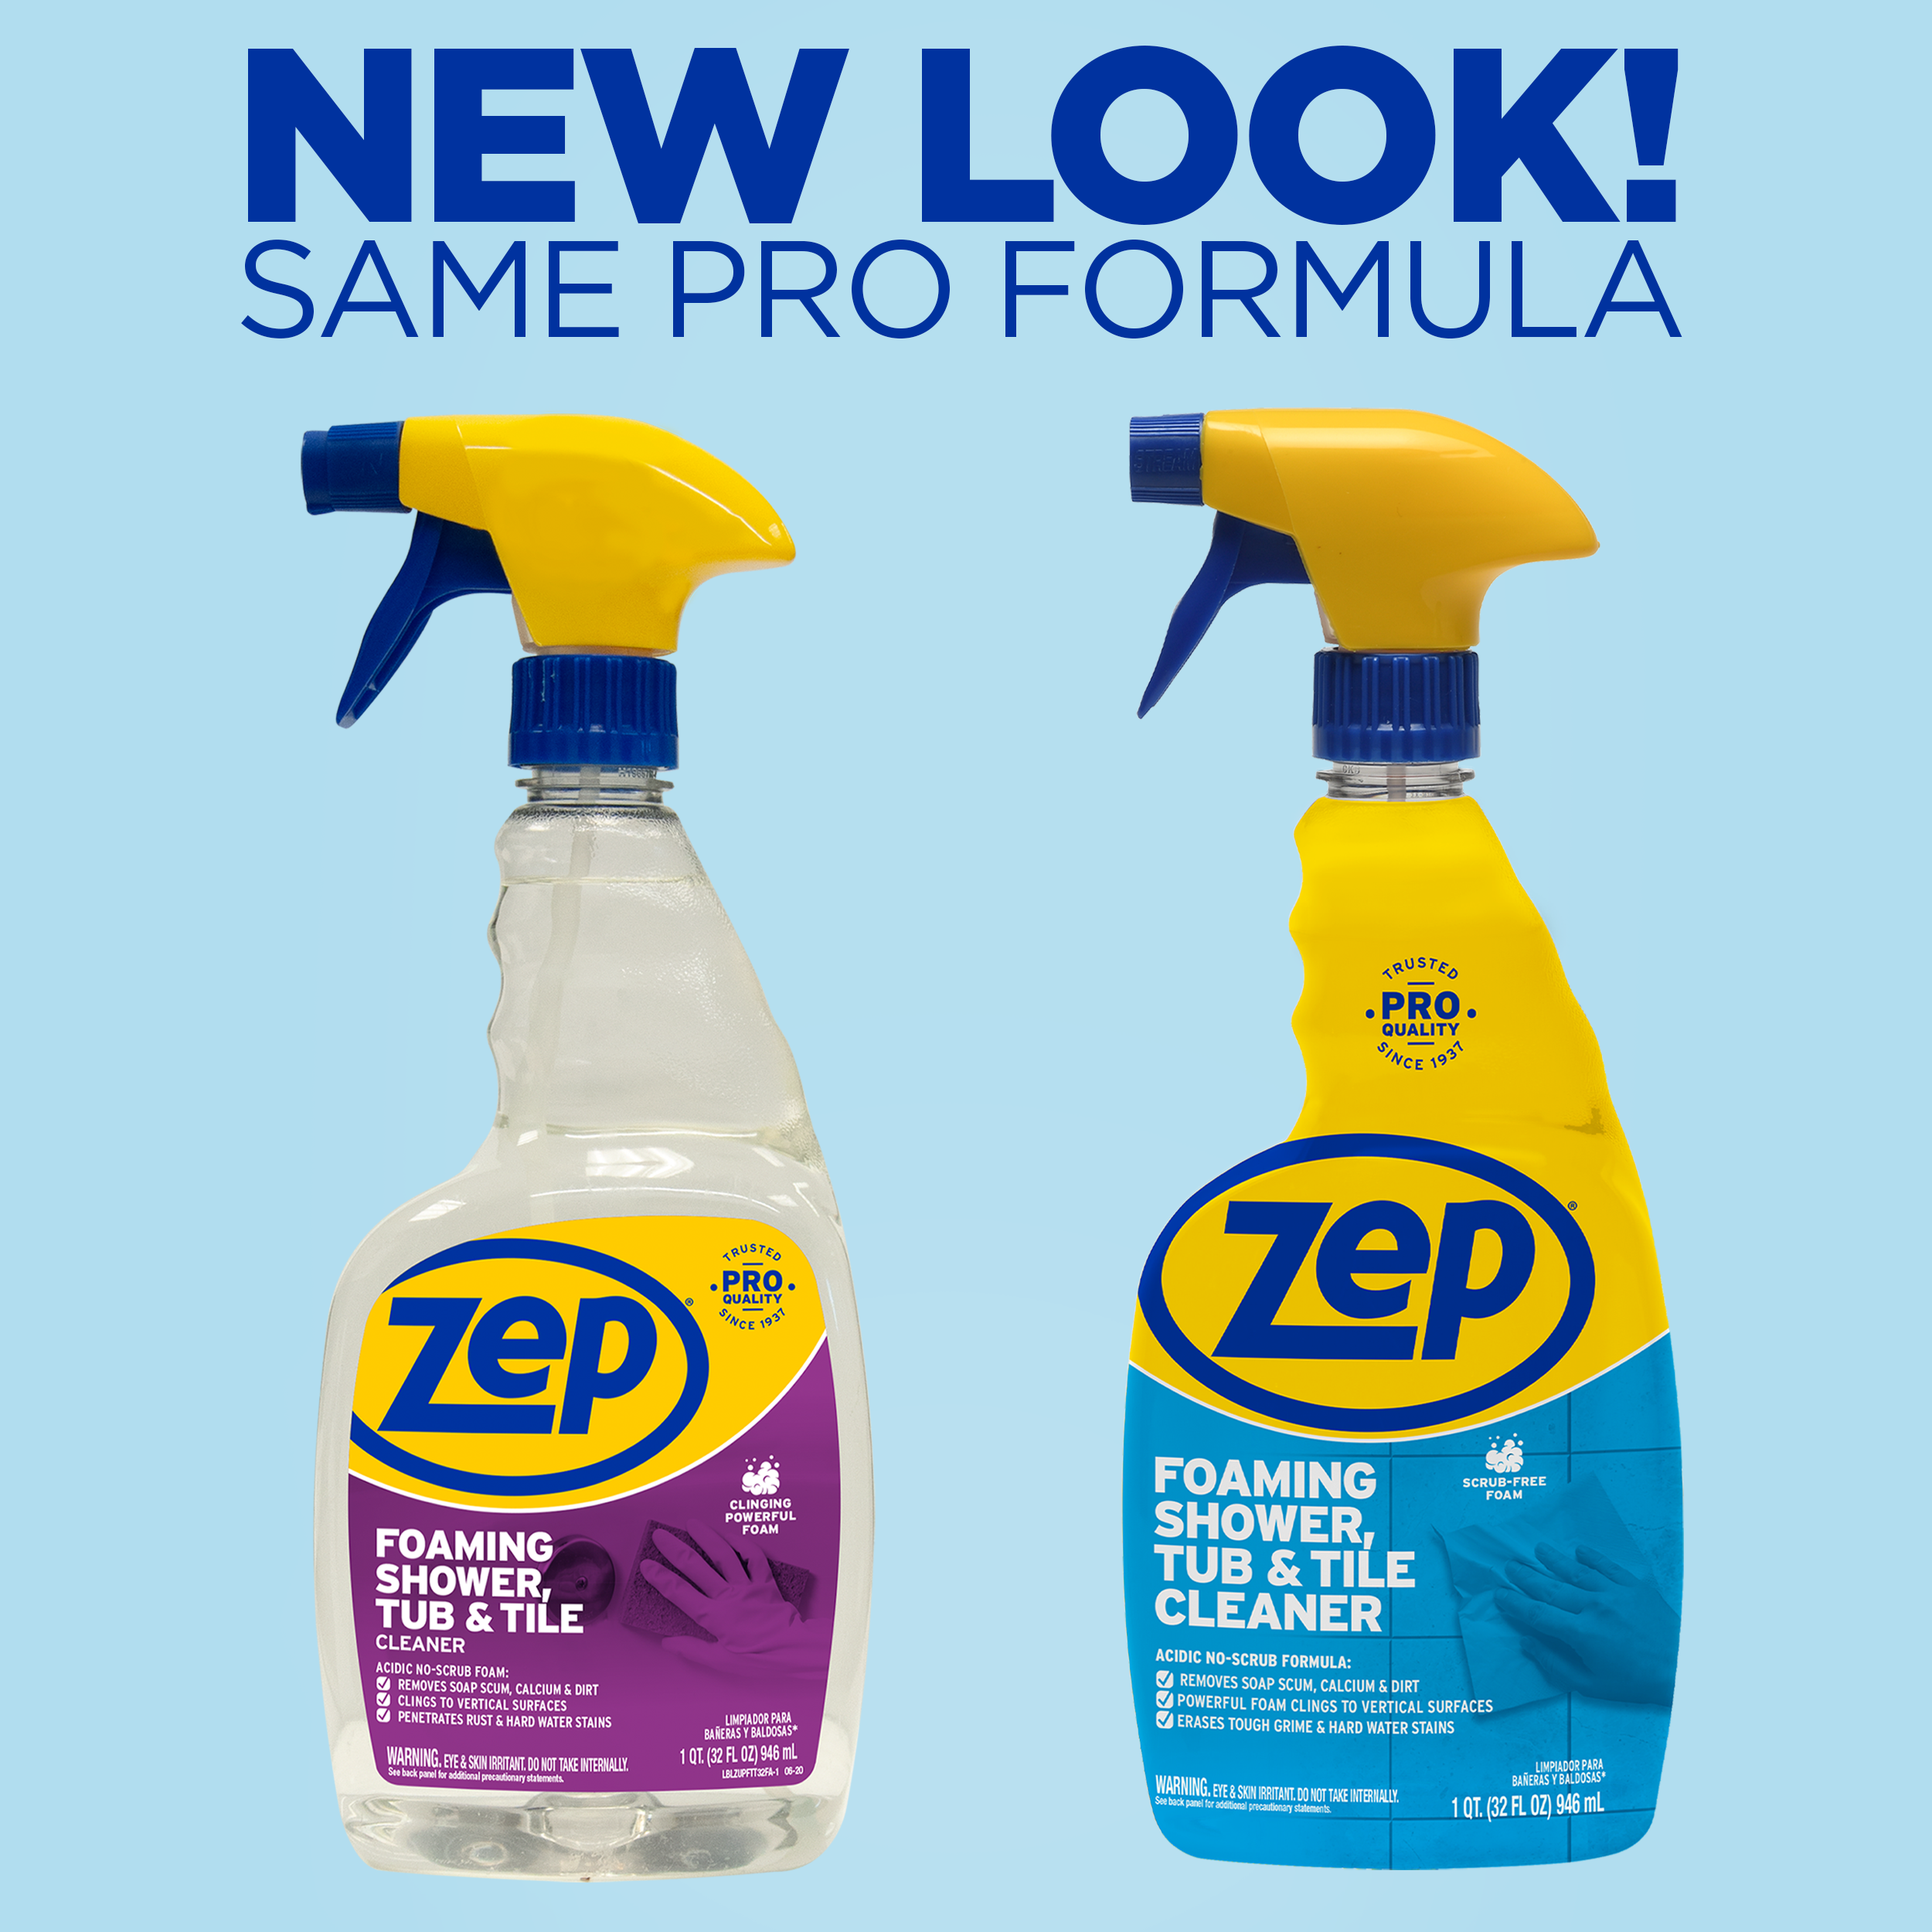 New Find! Zep Foaming Wall Cleaner. This stuff is awesome! Cleaning